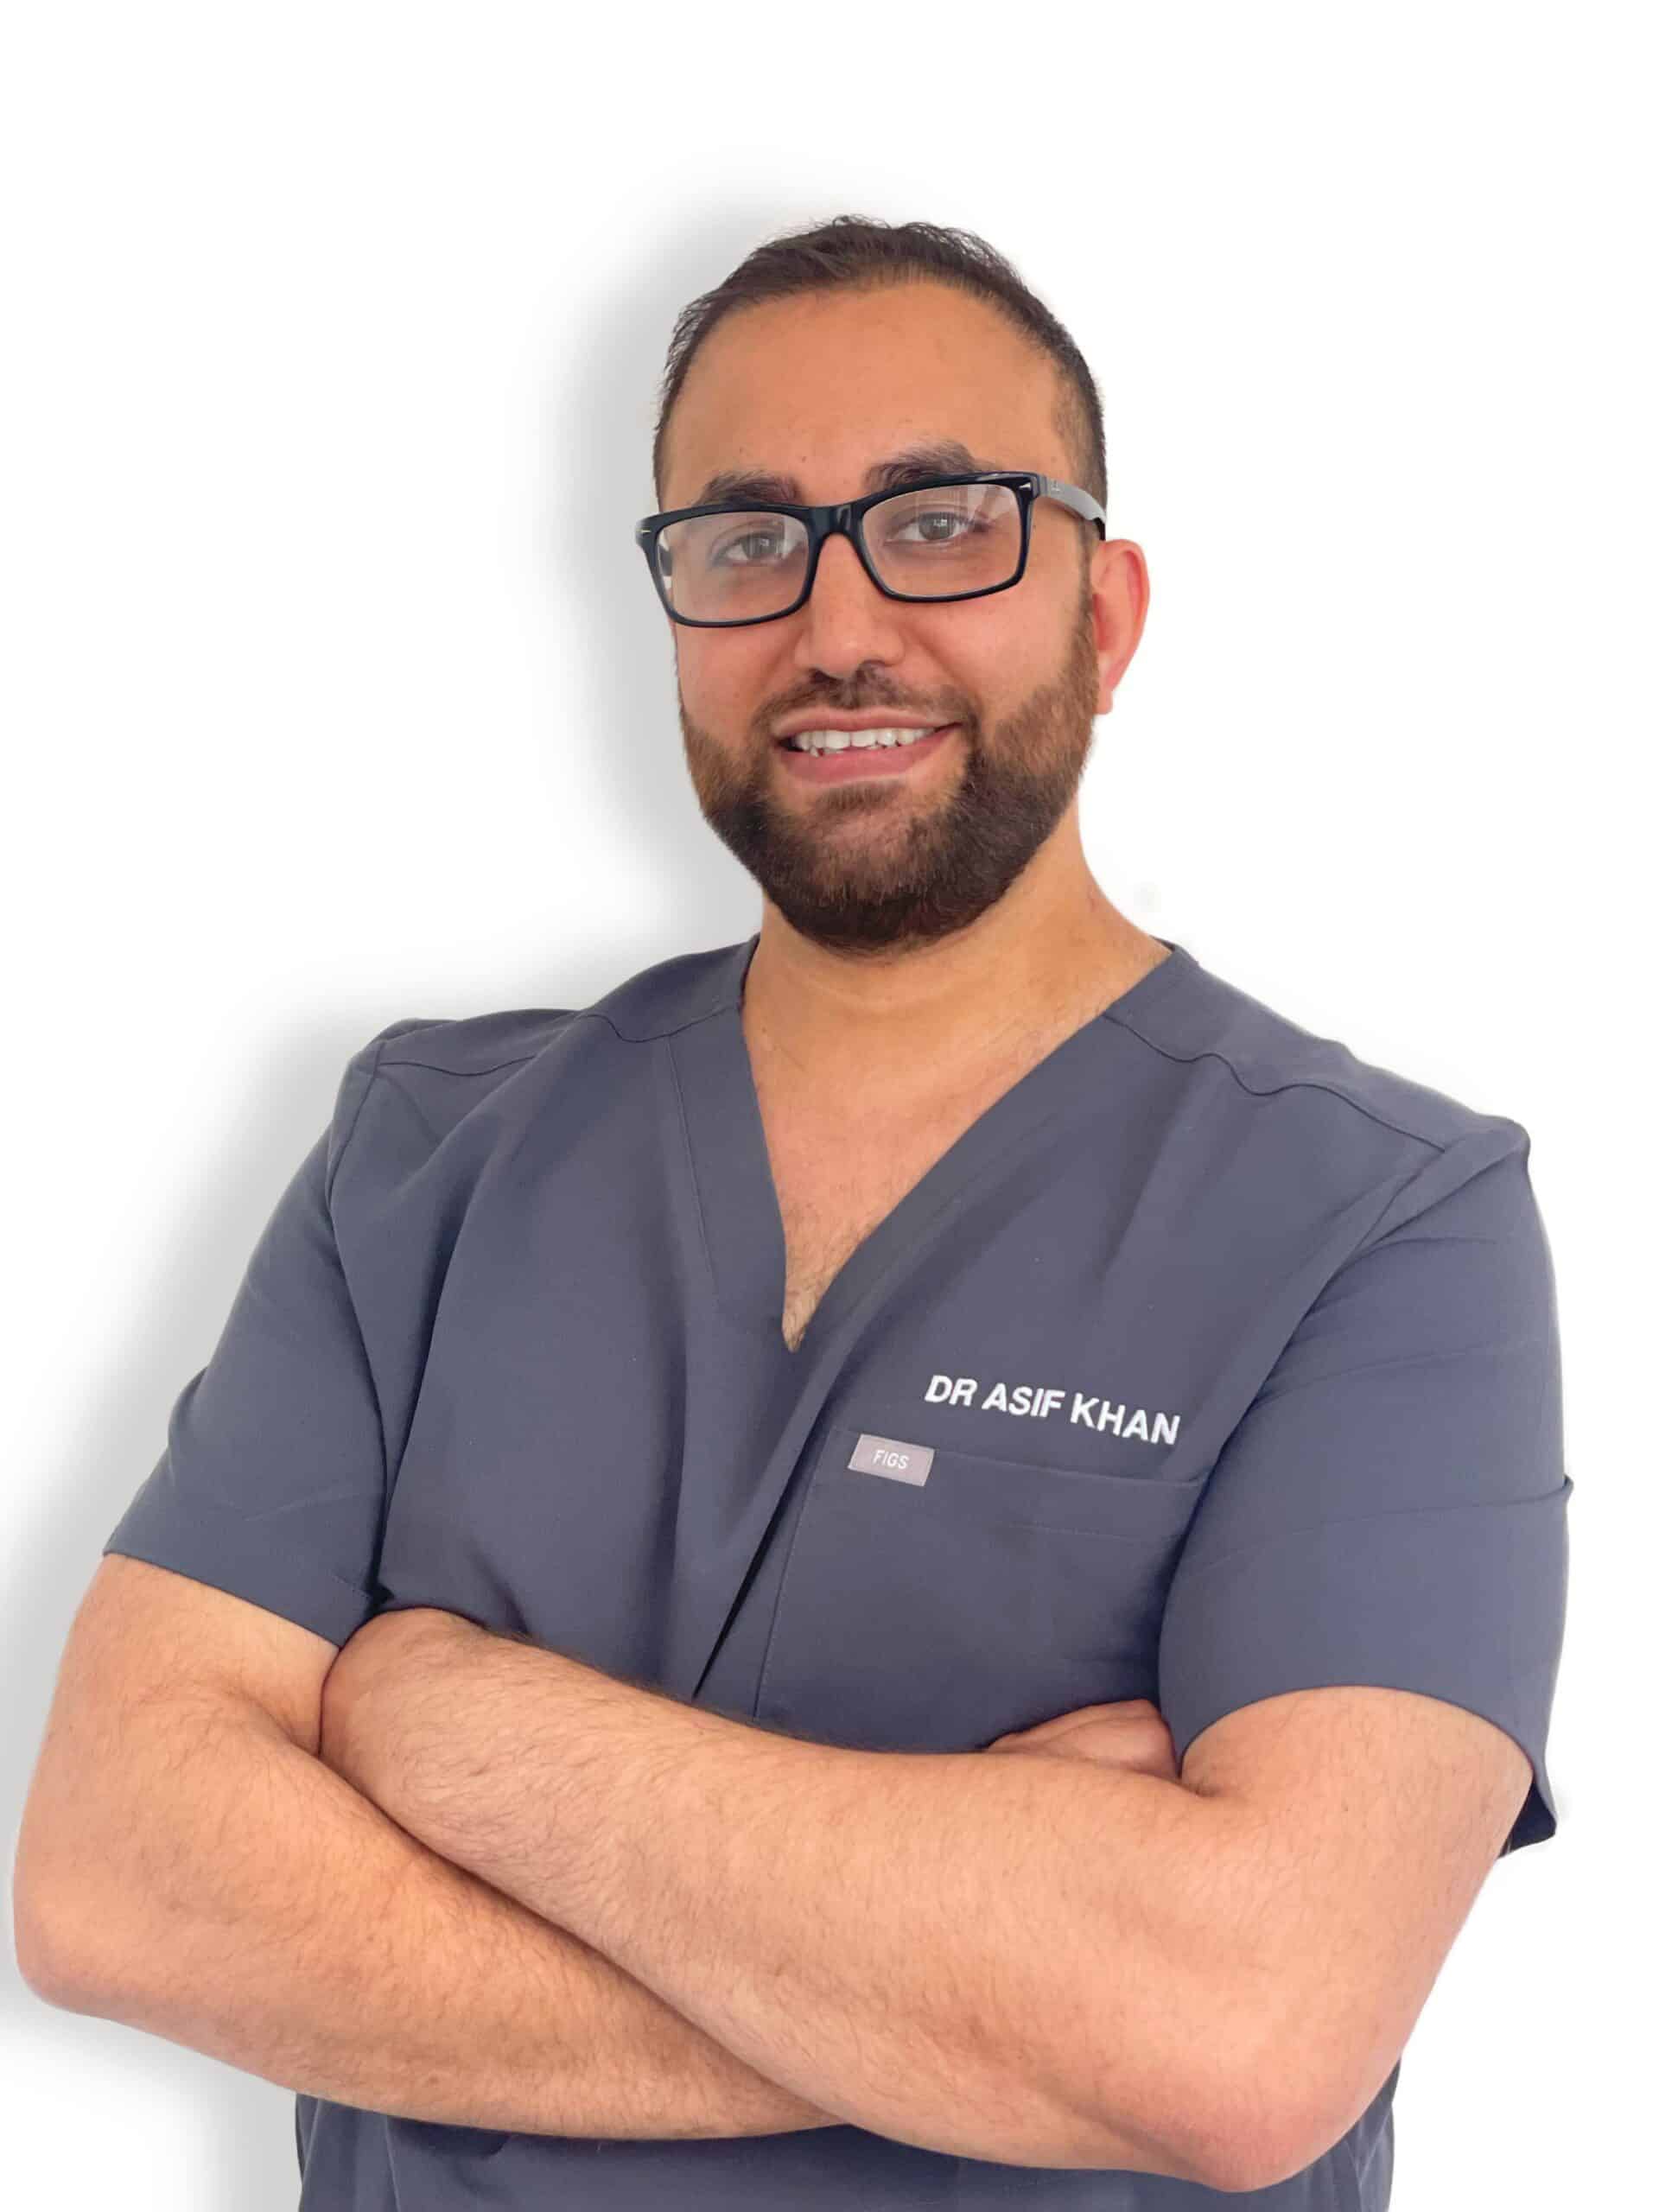 Dr Asif Khan from Medic Clinic in Bedford